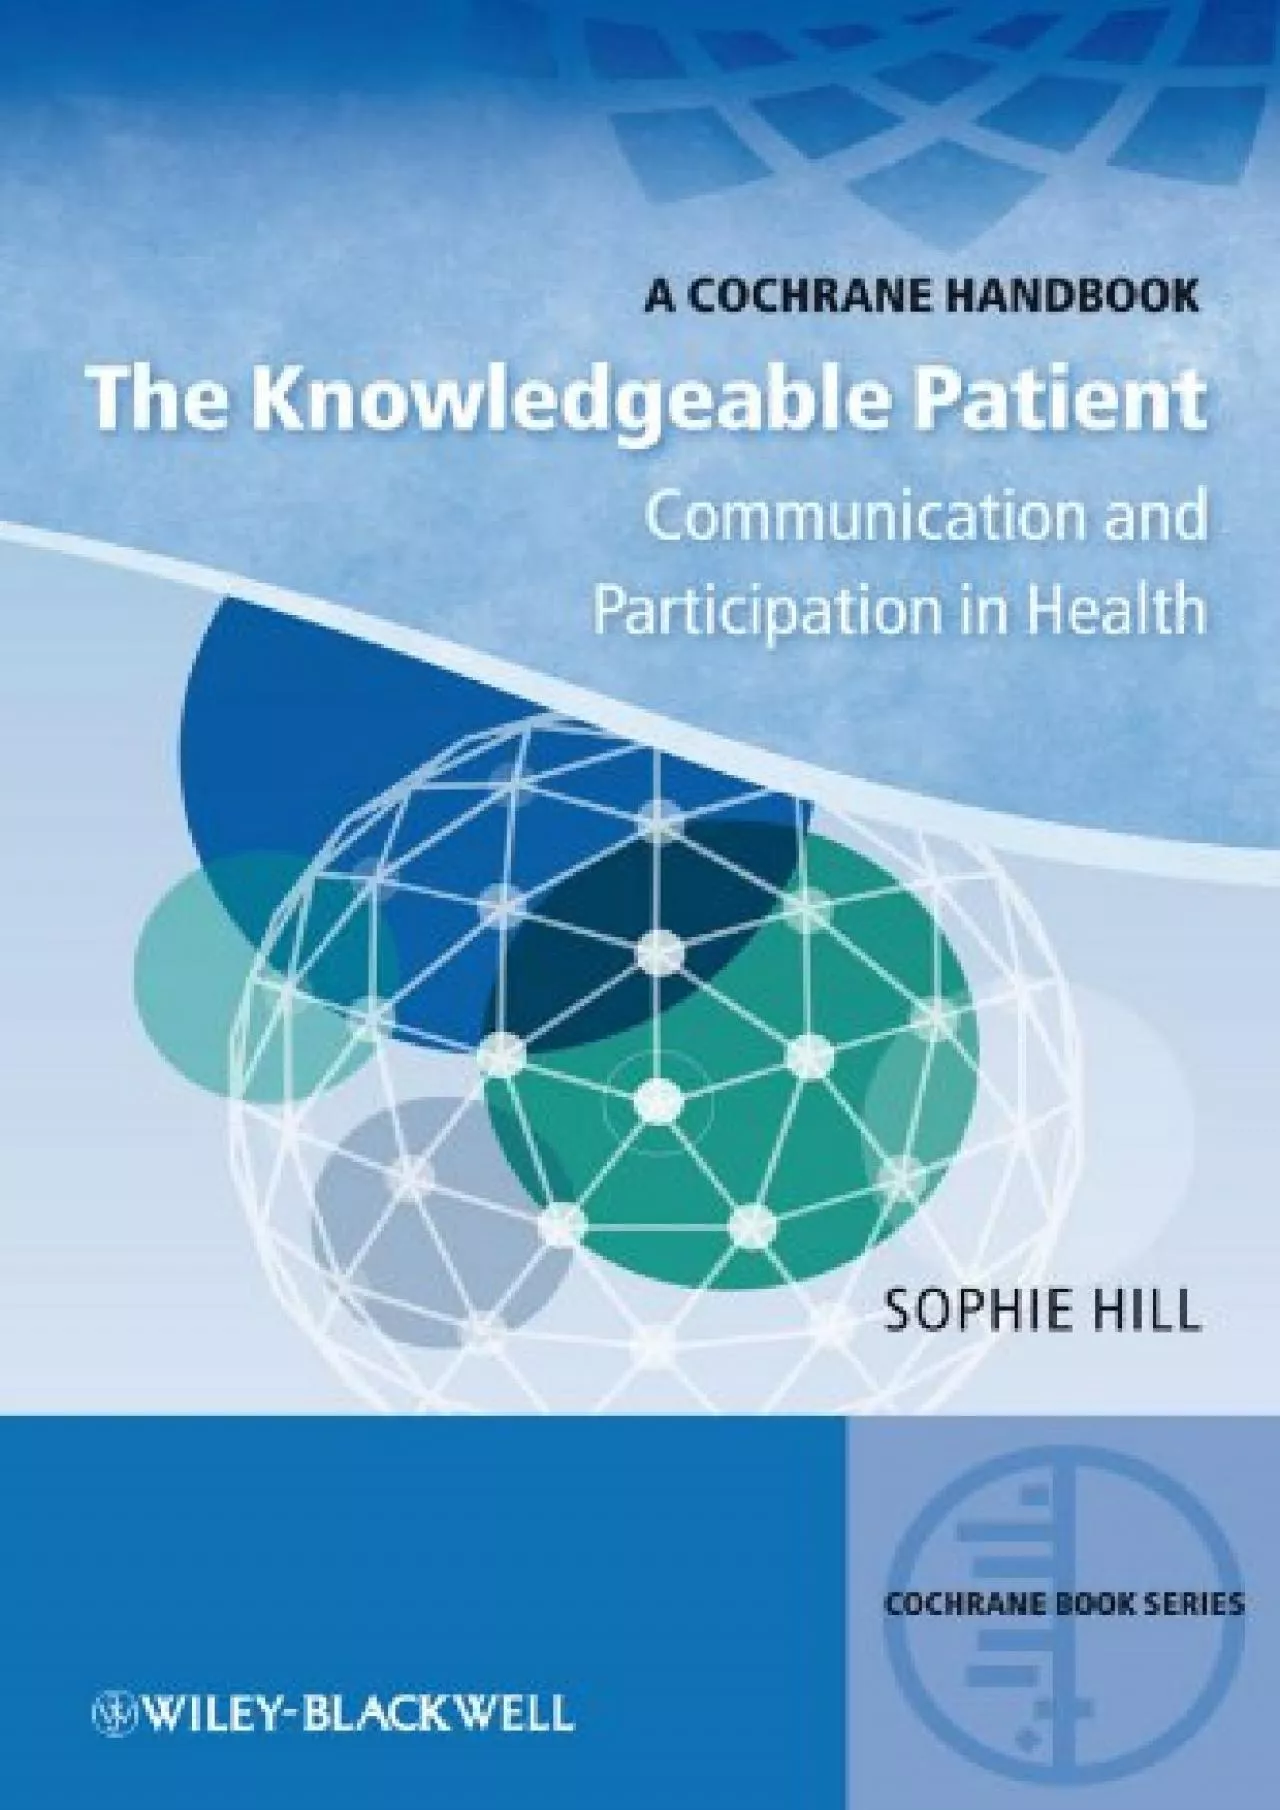 (DOWNLOAD)-The Knowledgeable Patient: Communication and Participation in Health (CBS-